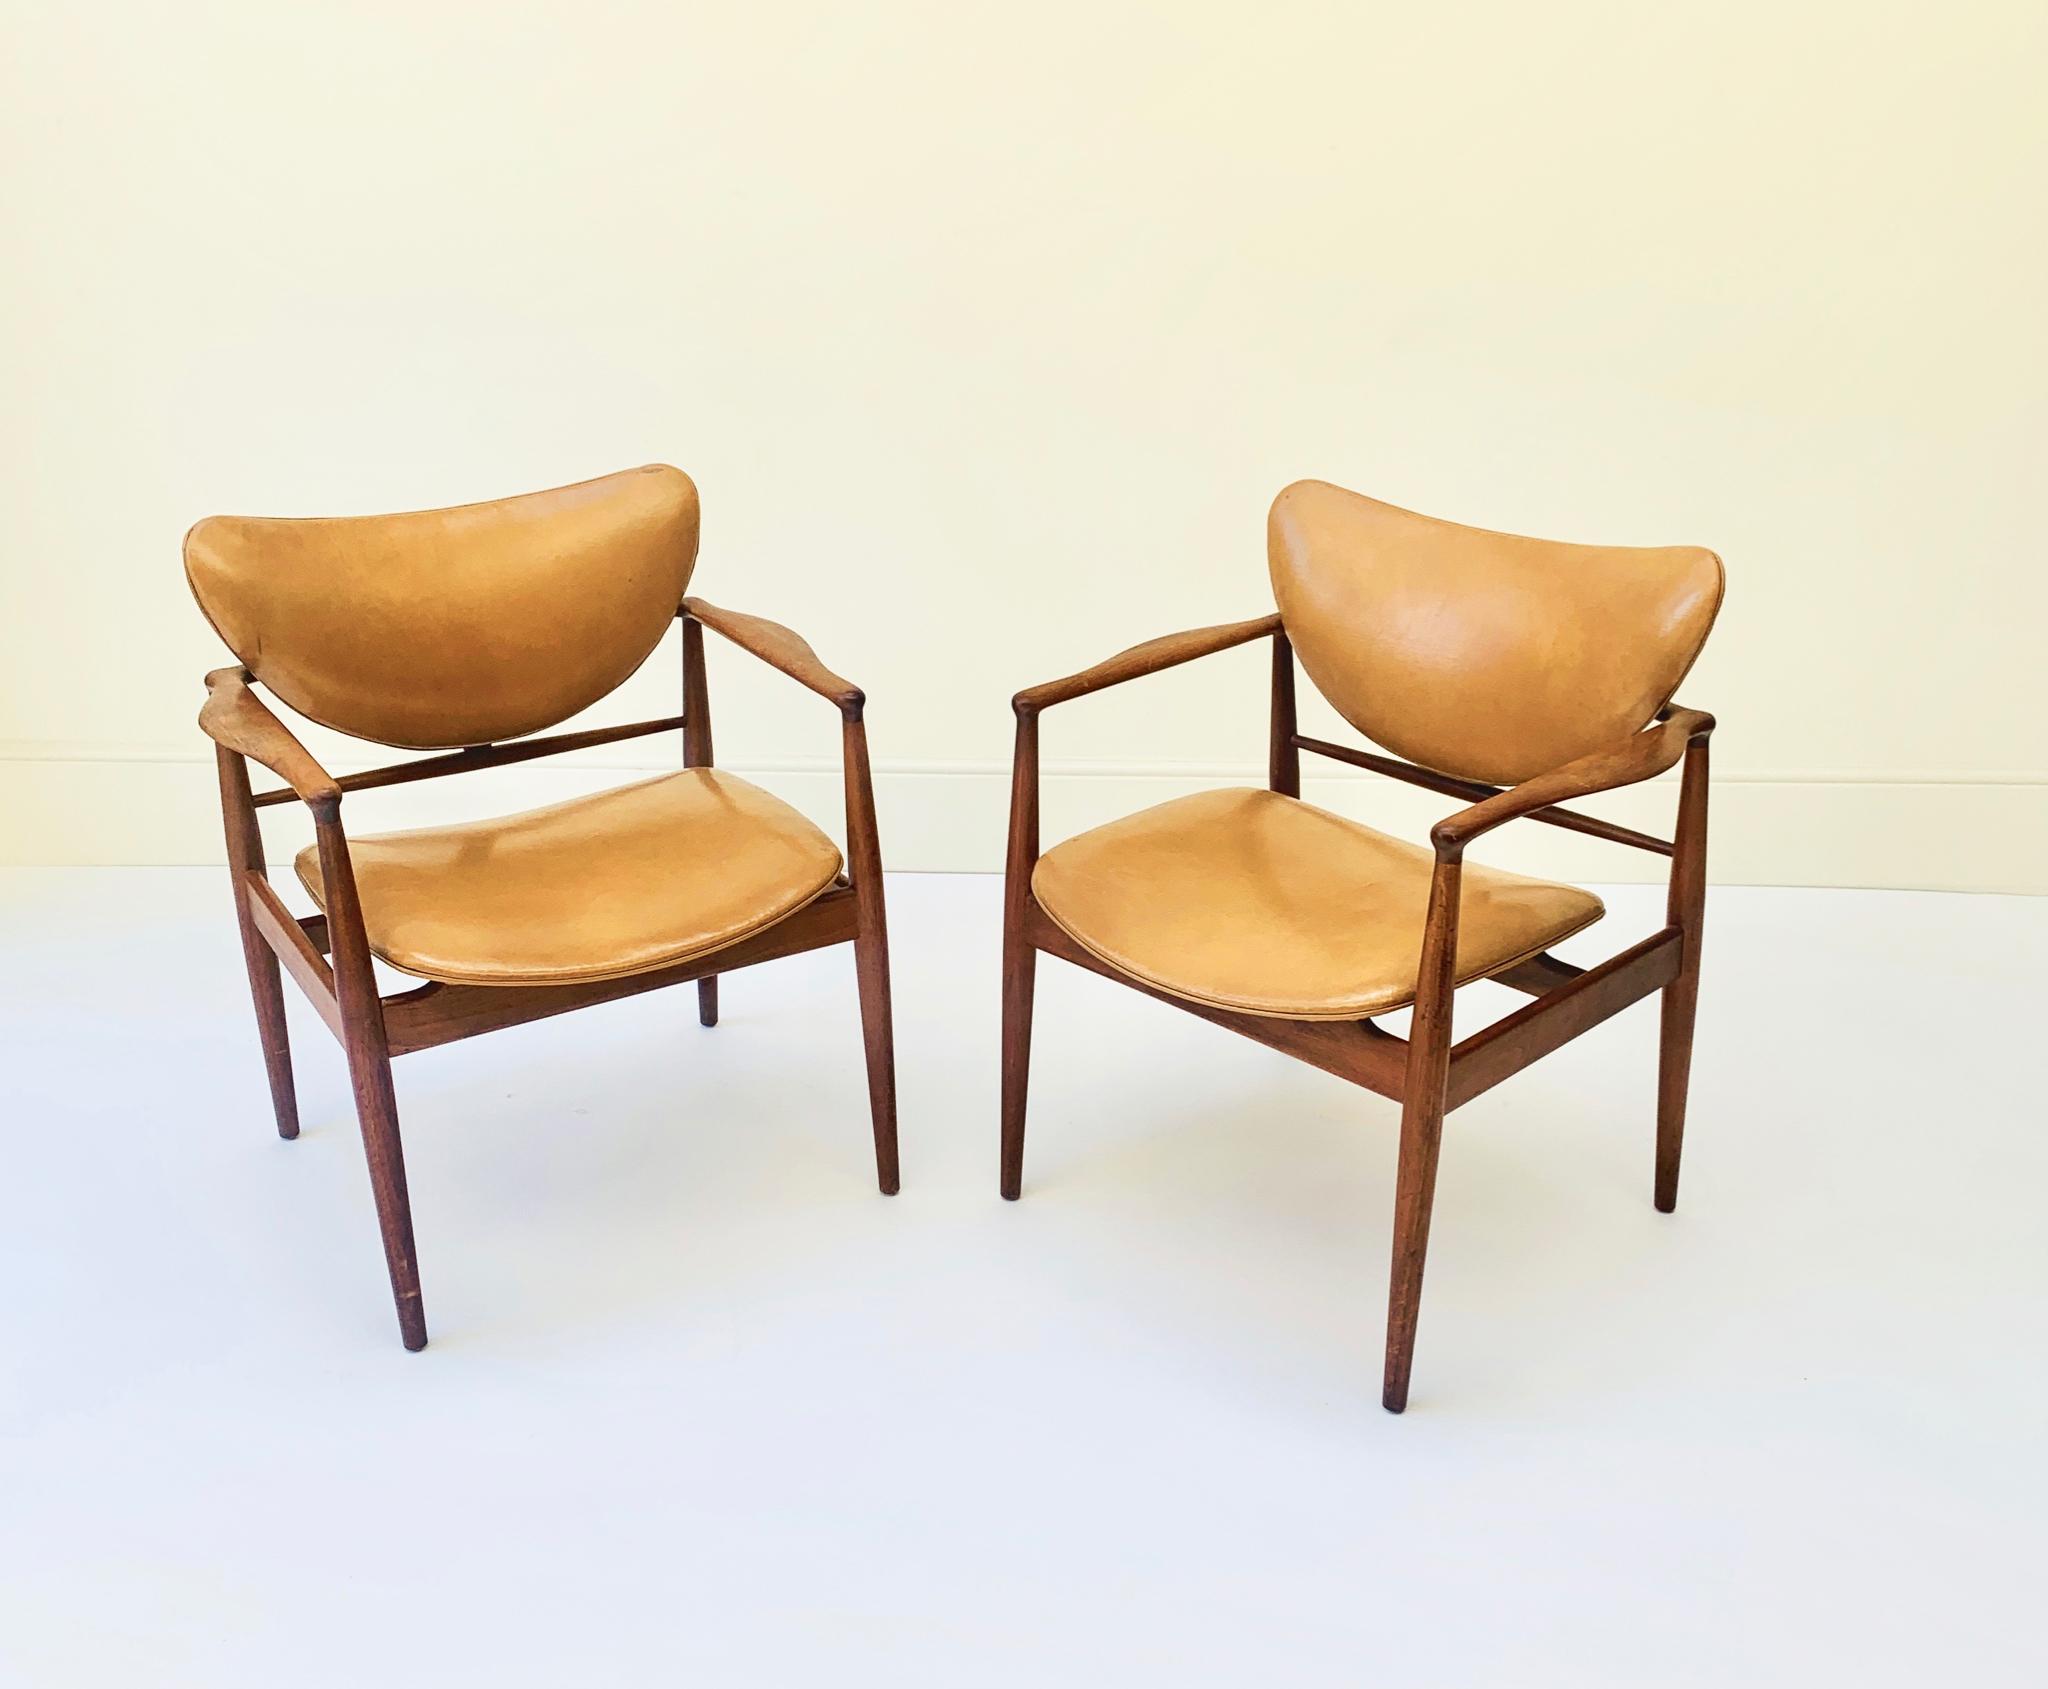 Sold - Pair of Armchairs